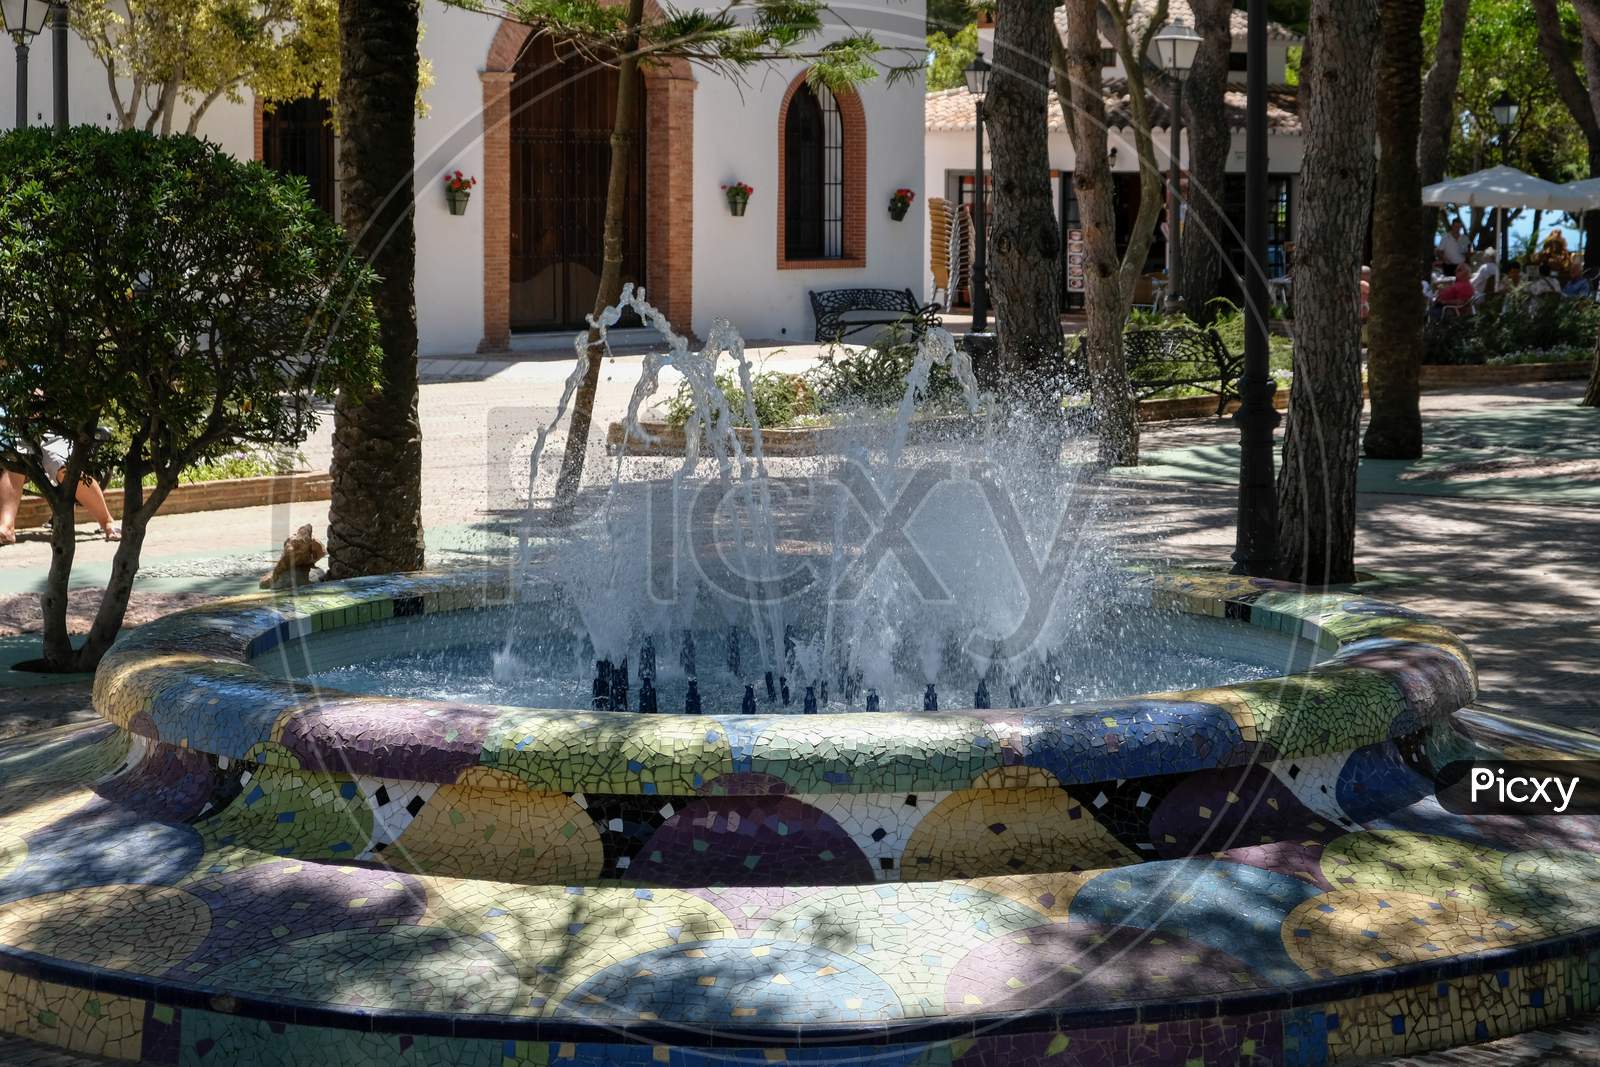 Mijas, Andalucia/Spain - July 3 : Fountain In Mijas Andalucía Spain On July 3, 2017. Unidentified People